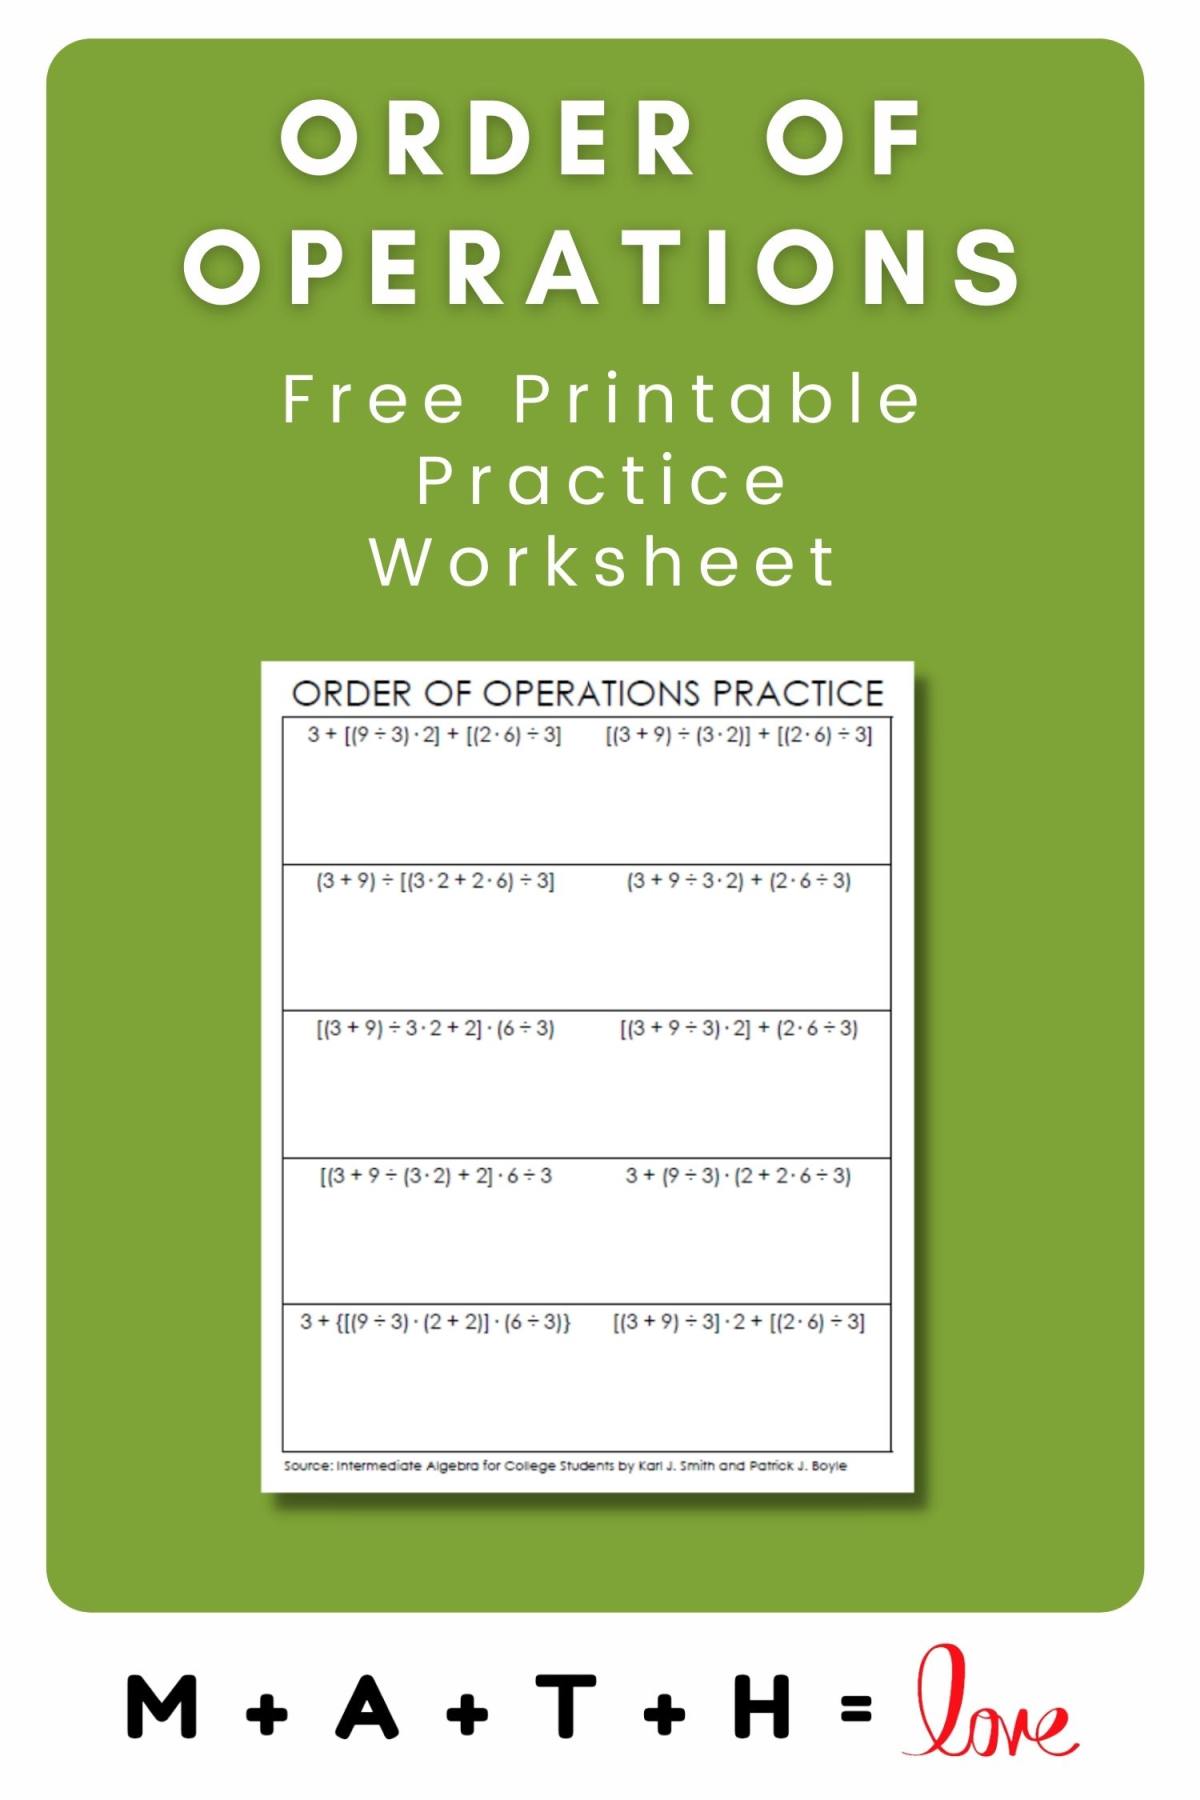 Order of Operations Practice Worksheet  Math = Love For Operations With Functions Worksheet